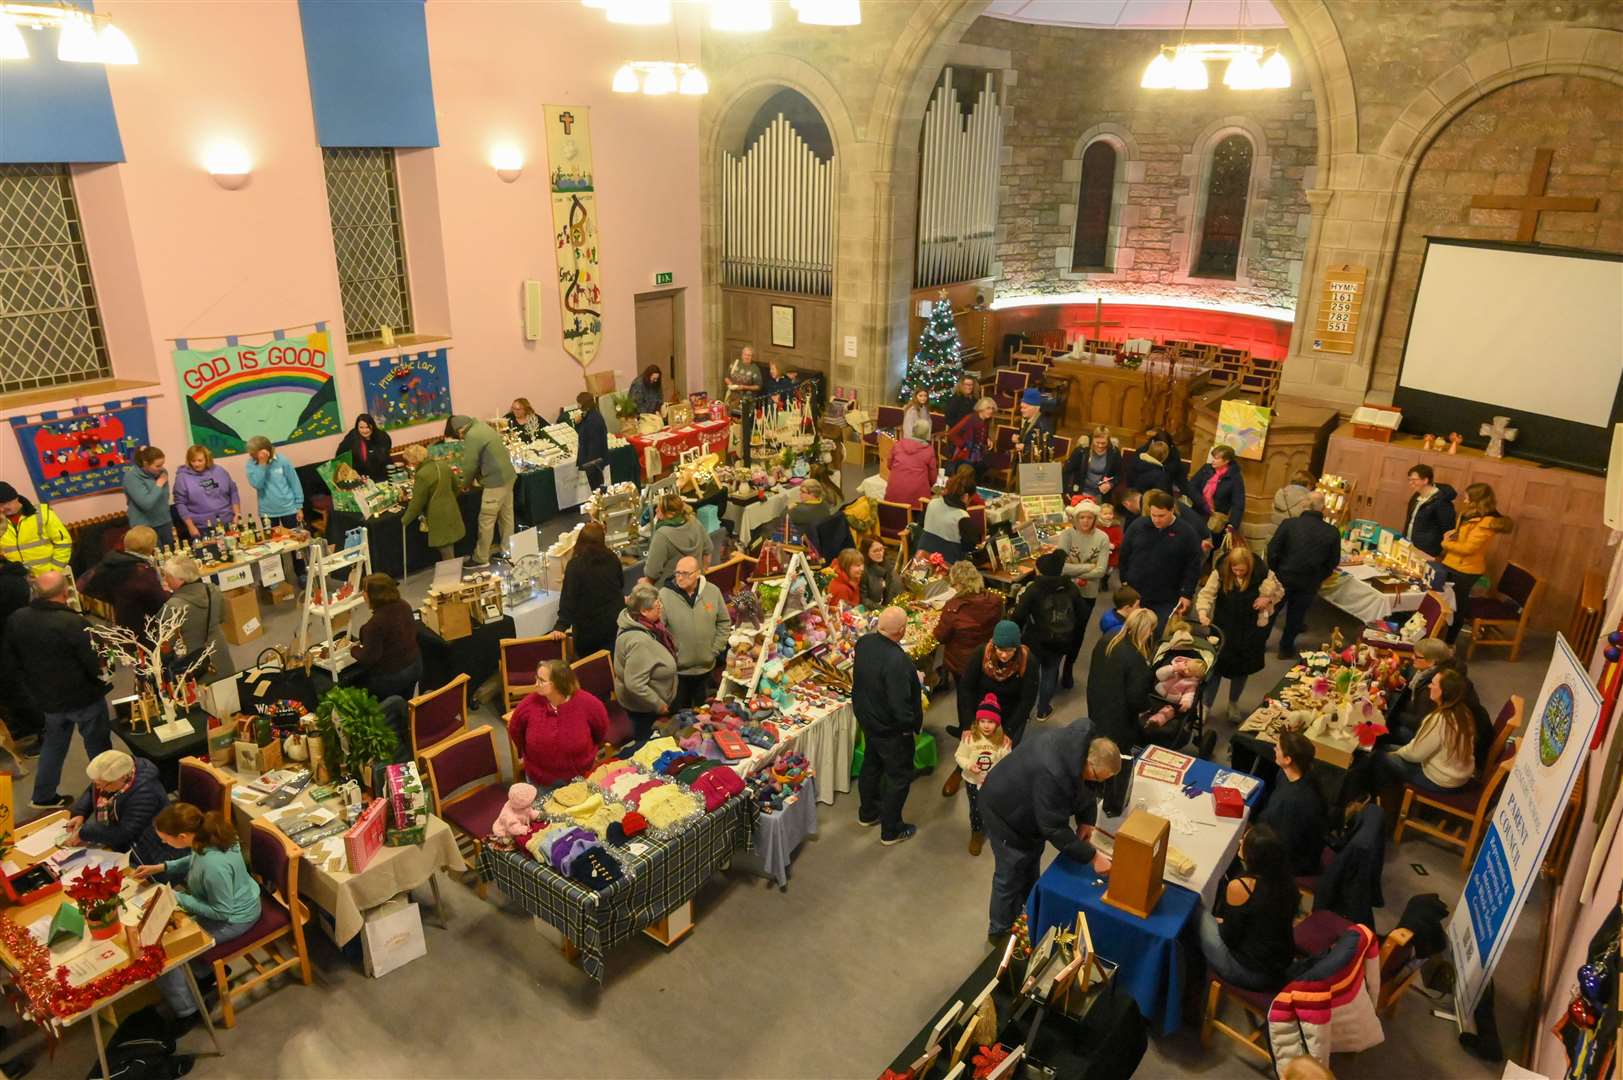 The Parish Church was alive last year with crafters and visitors.